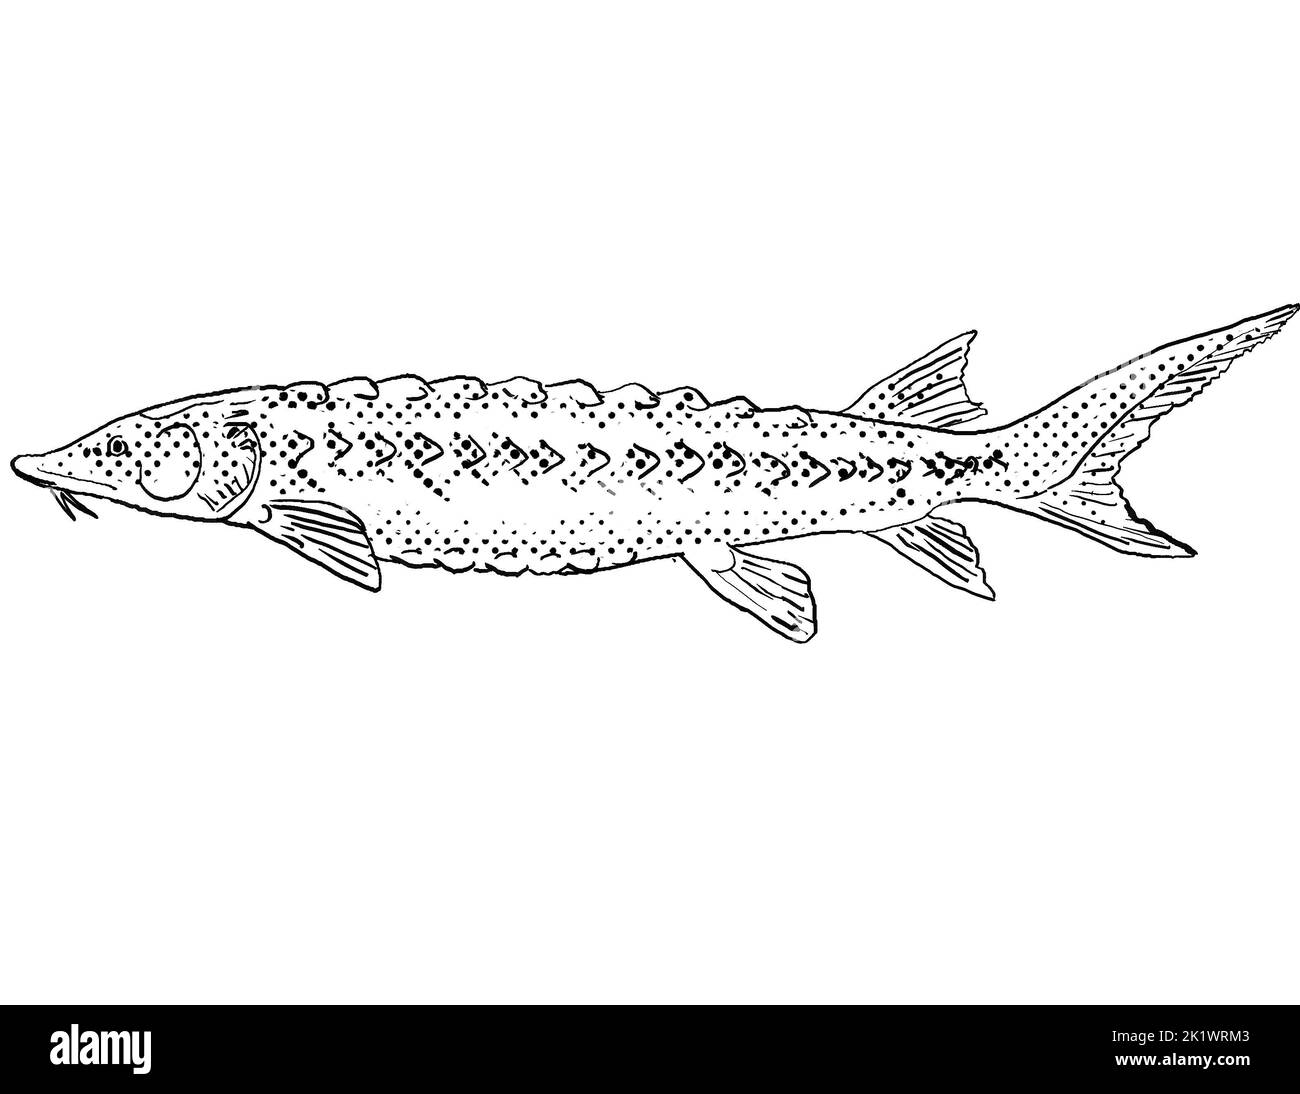 Cartoon style line drawing of a shortnose sturgeon or Acipenser brevirostrum a freshwater fish endemic to North America with halftone dots shading on Stock Photo